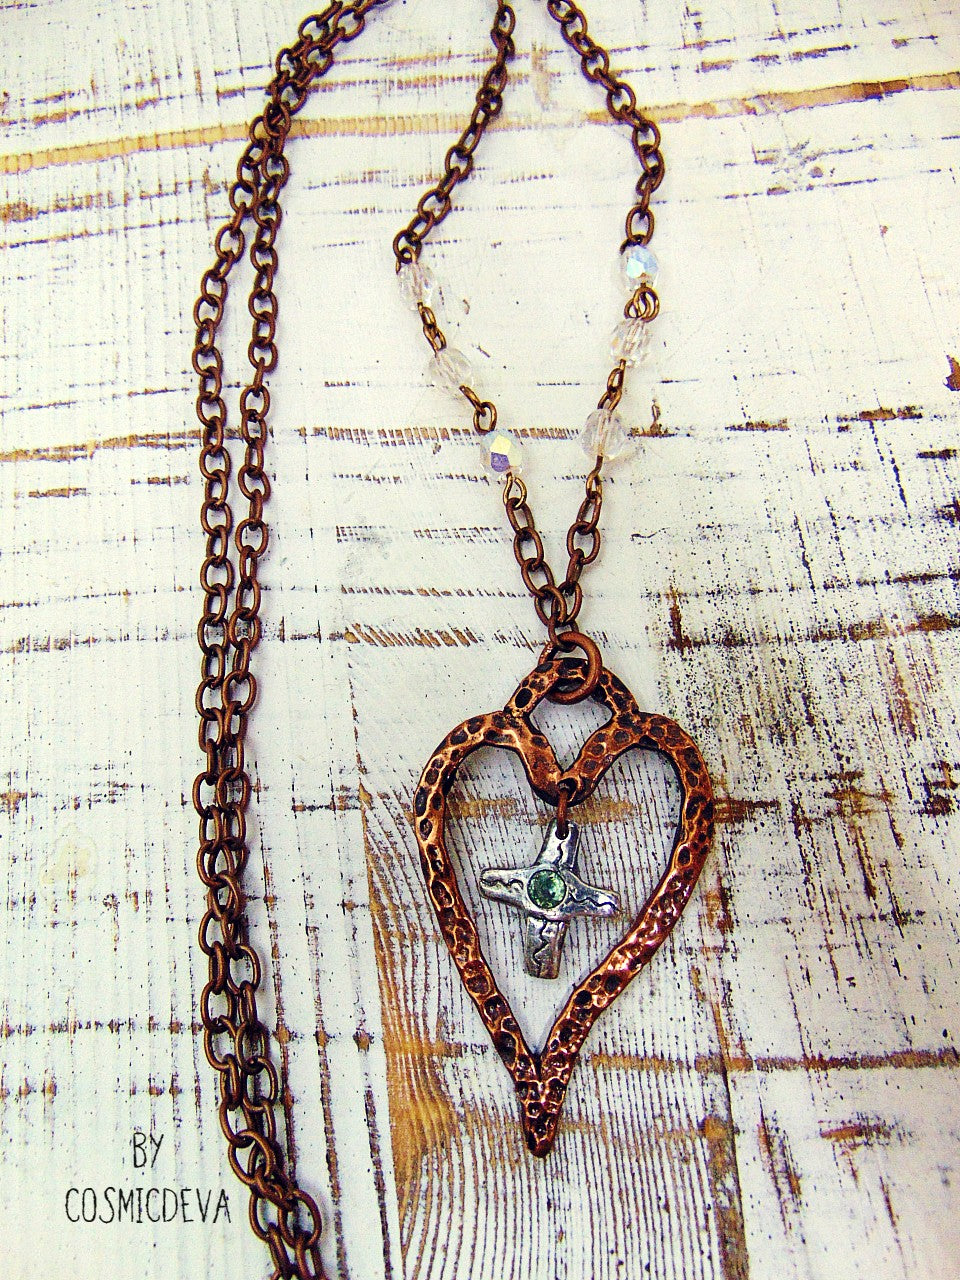 For The Love Of God - Express your faith in style and show your love for God with this beautiful handmade copper heart and sterling silver cross necklace, featuring an exquisite light blue topaz in the center. The deep warm finish and accentual aura white facetted Czech glass beads add a charming touch to your most special occasions.